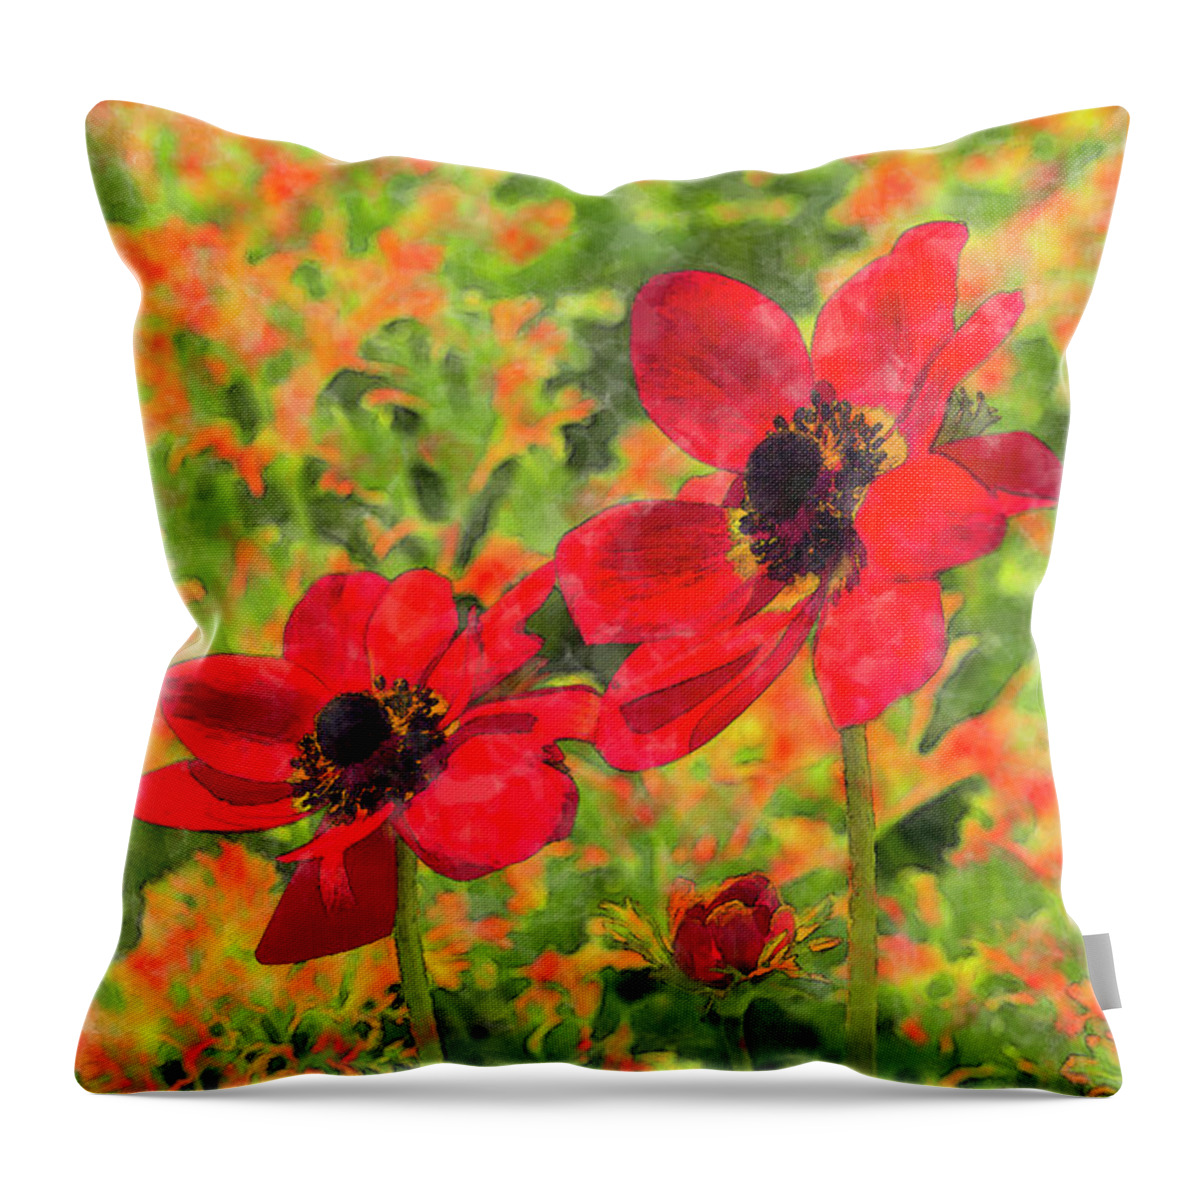 Anemone Coronaria Throw Pillow featuring the digital art Red Poppy Anemones by Tanya C Smith